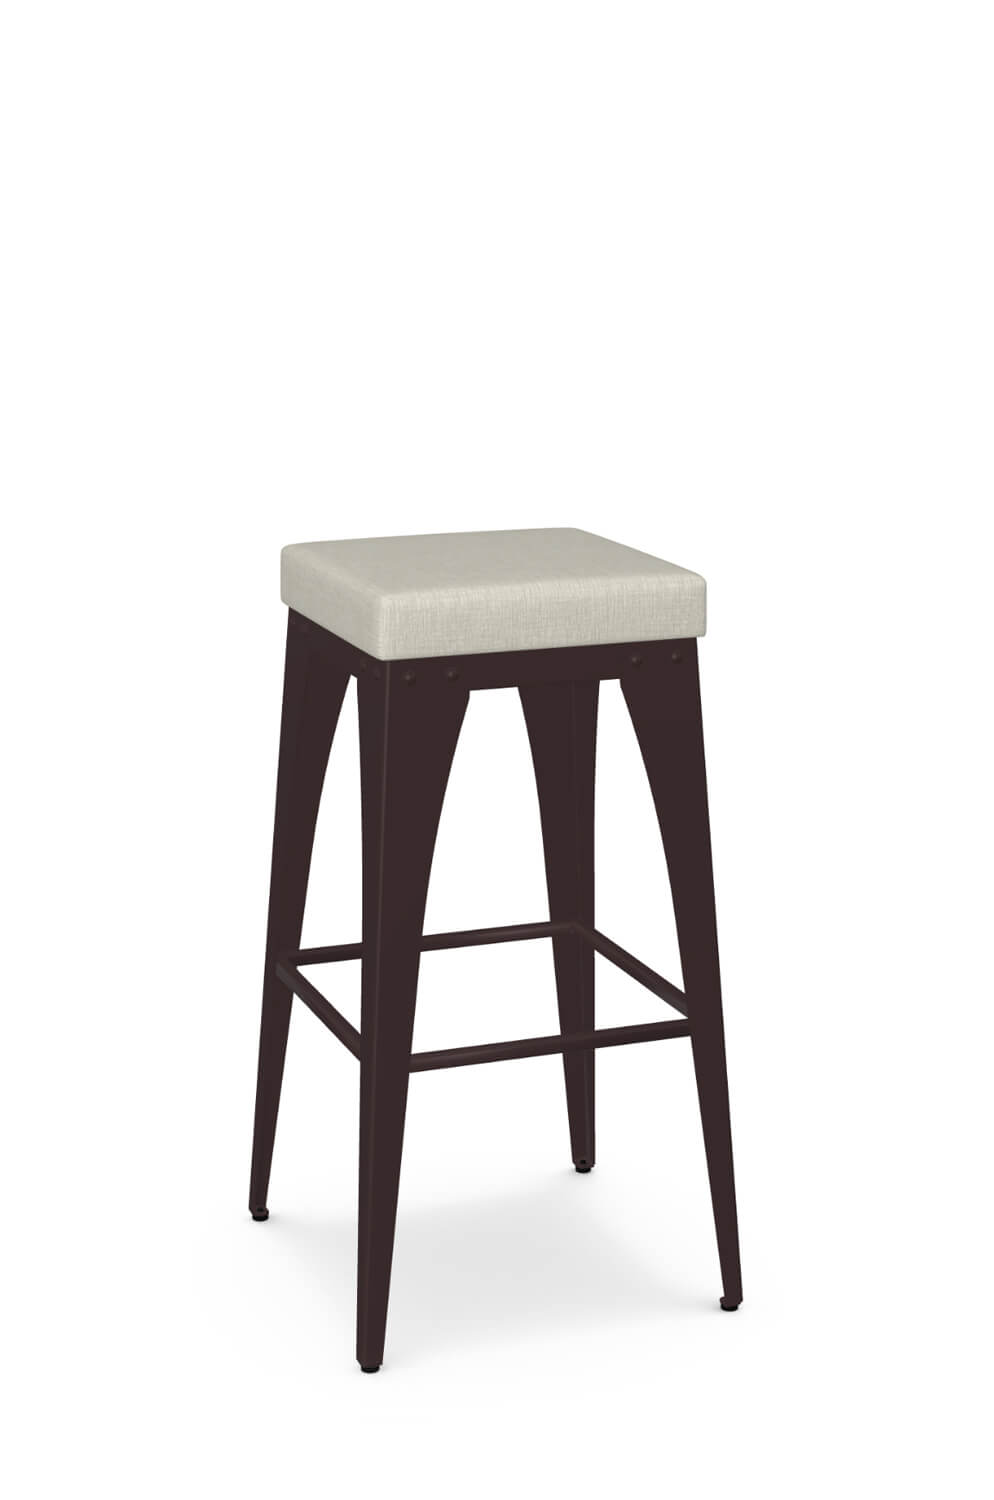 https://barstoolcomforts.com/wp-content/uploads/2016/05/amisco-upright-industrial-backless-bar-stool-in-bronze.jpg